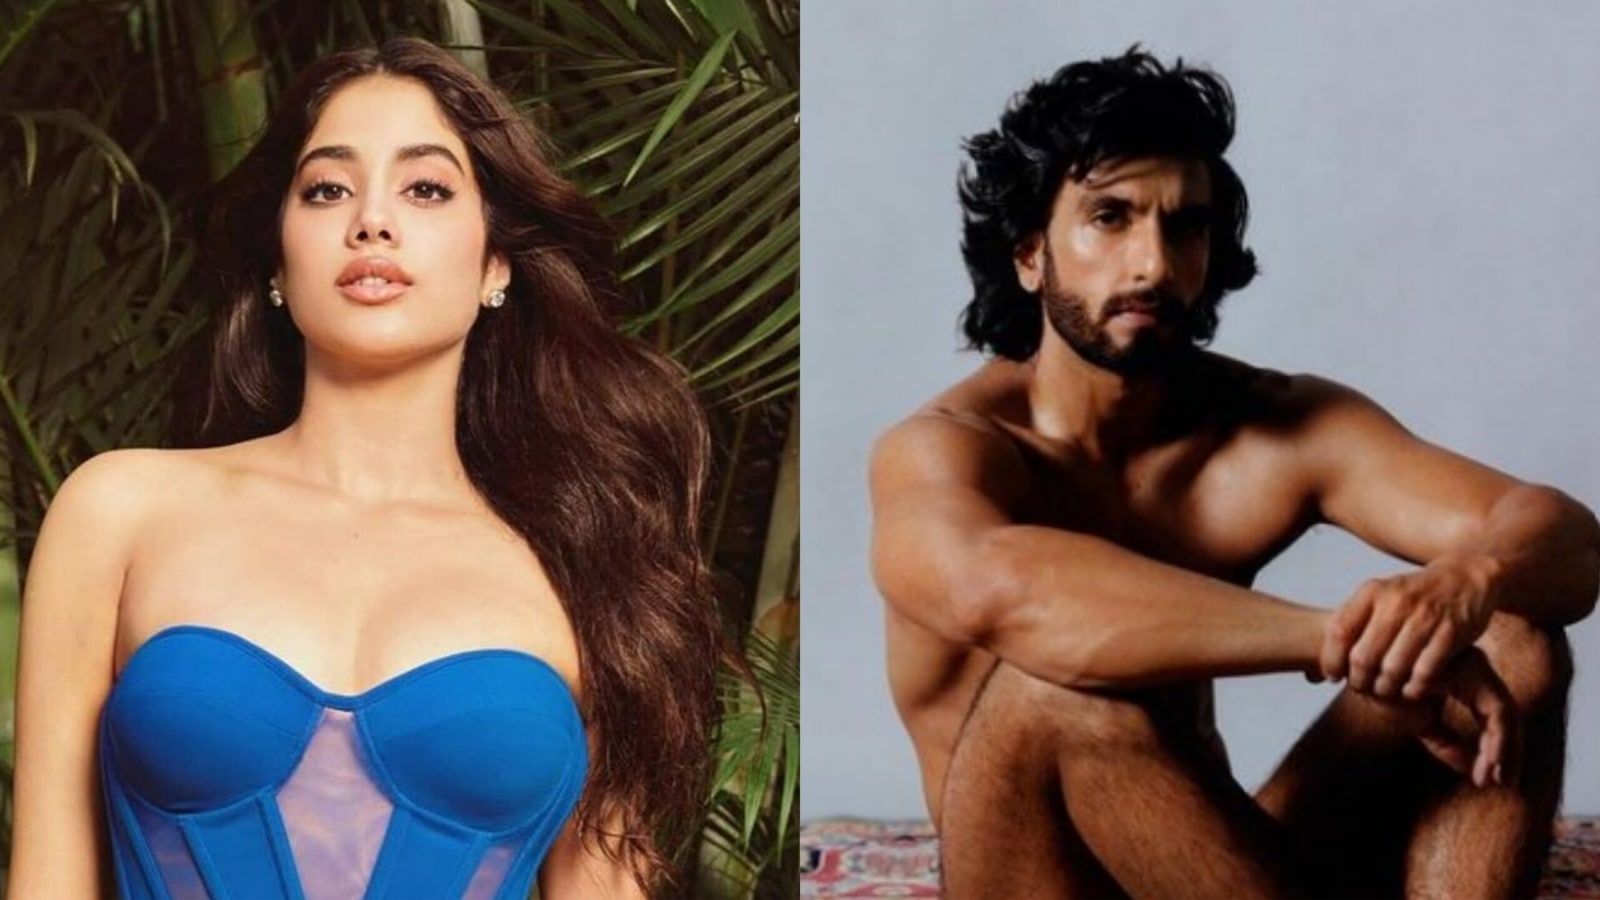 Dipika Sigh Sex - Janhvi Kapoor reacts to Ranveer Singh's nude photoshoot: 'It's artistic  freedom' | Bollywood - Hindustan Times